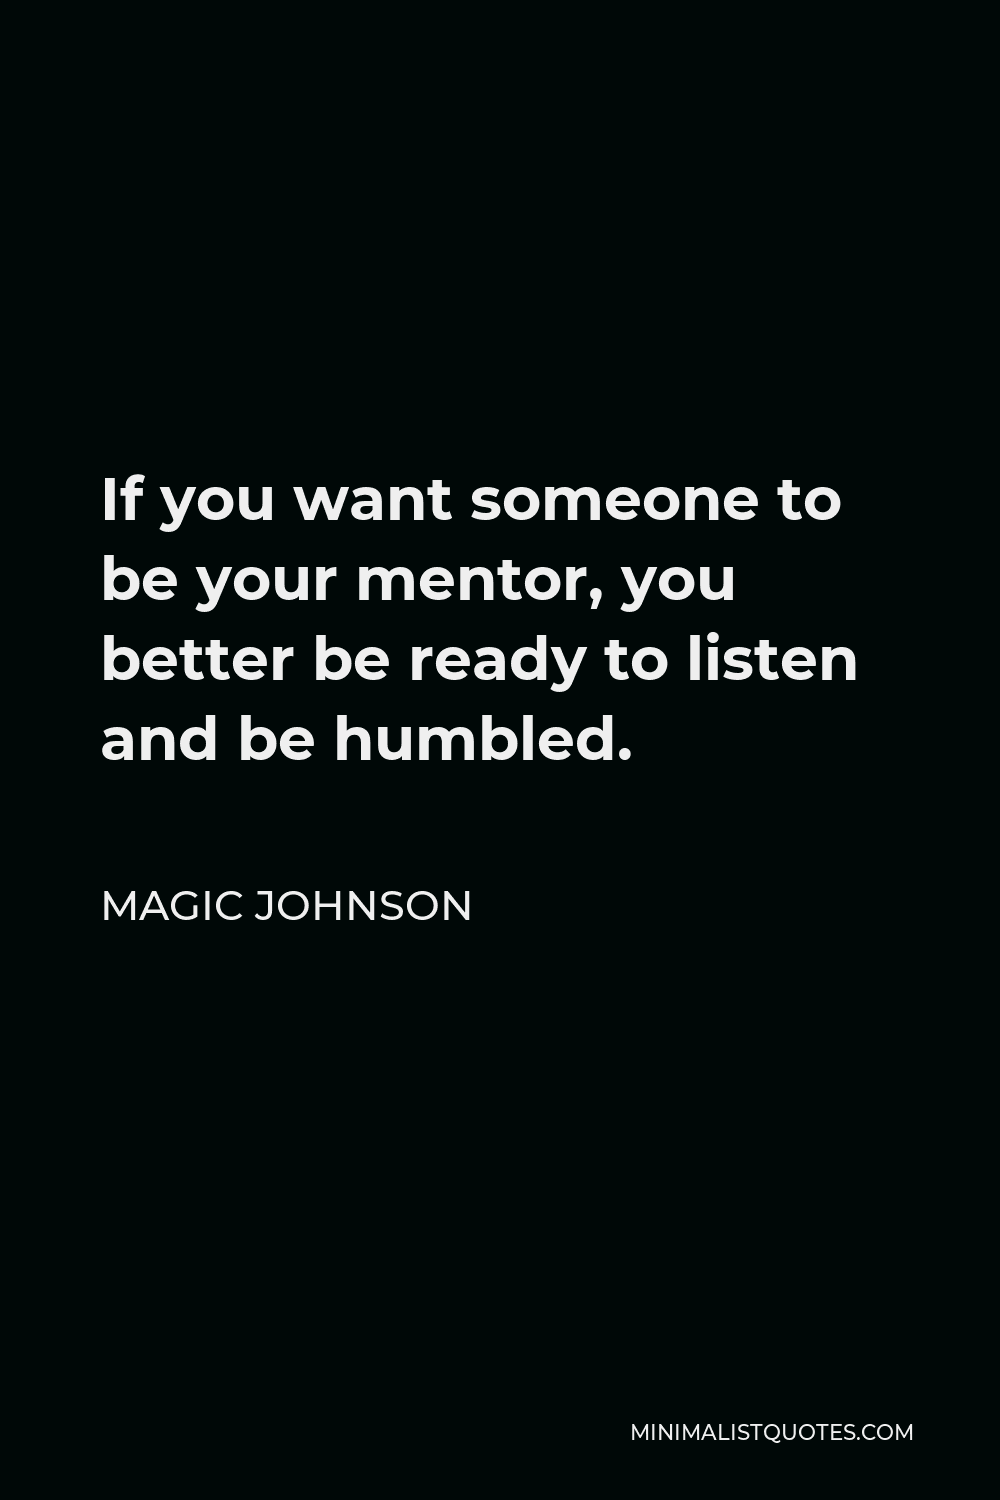 Magic Johnson Quote - If you want someone to be your mentor, you better be ready to listen and be humbled.